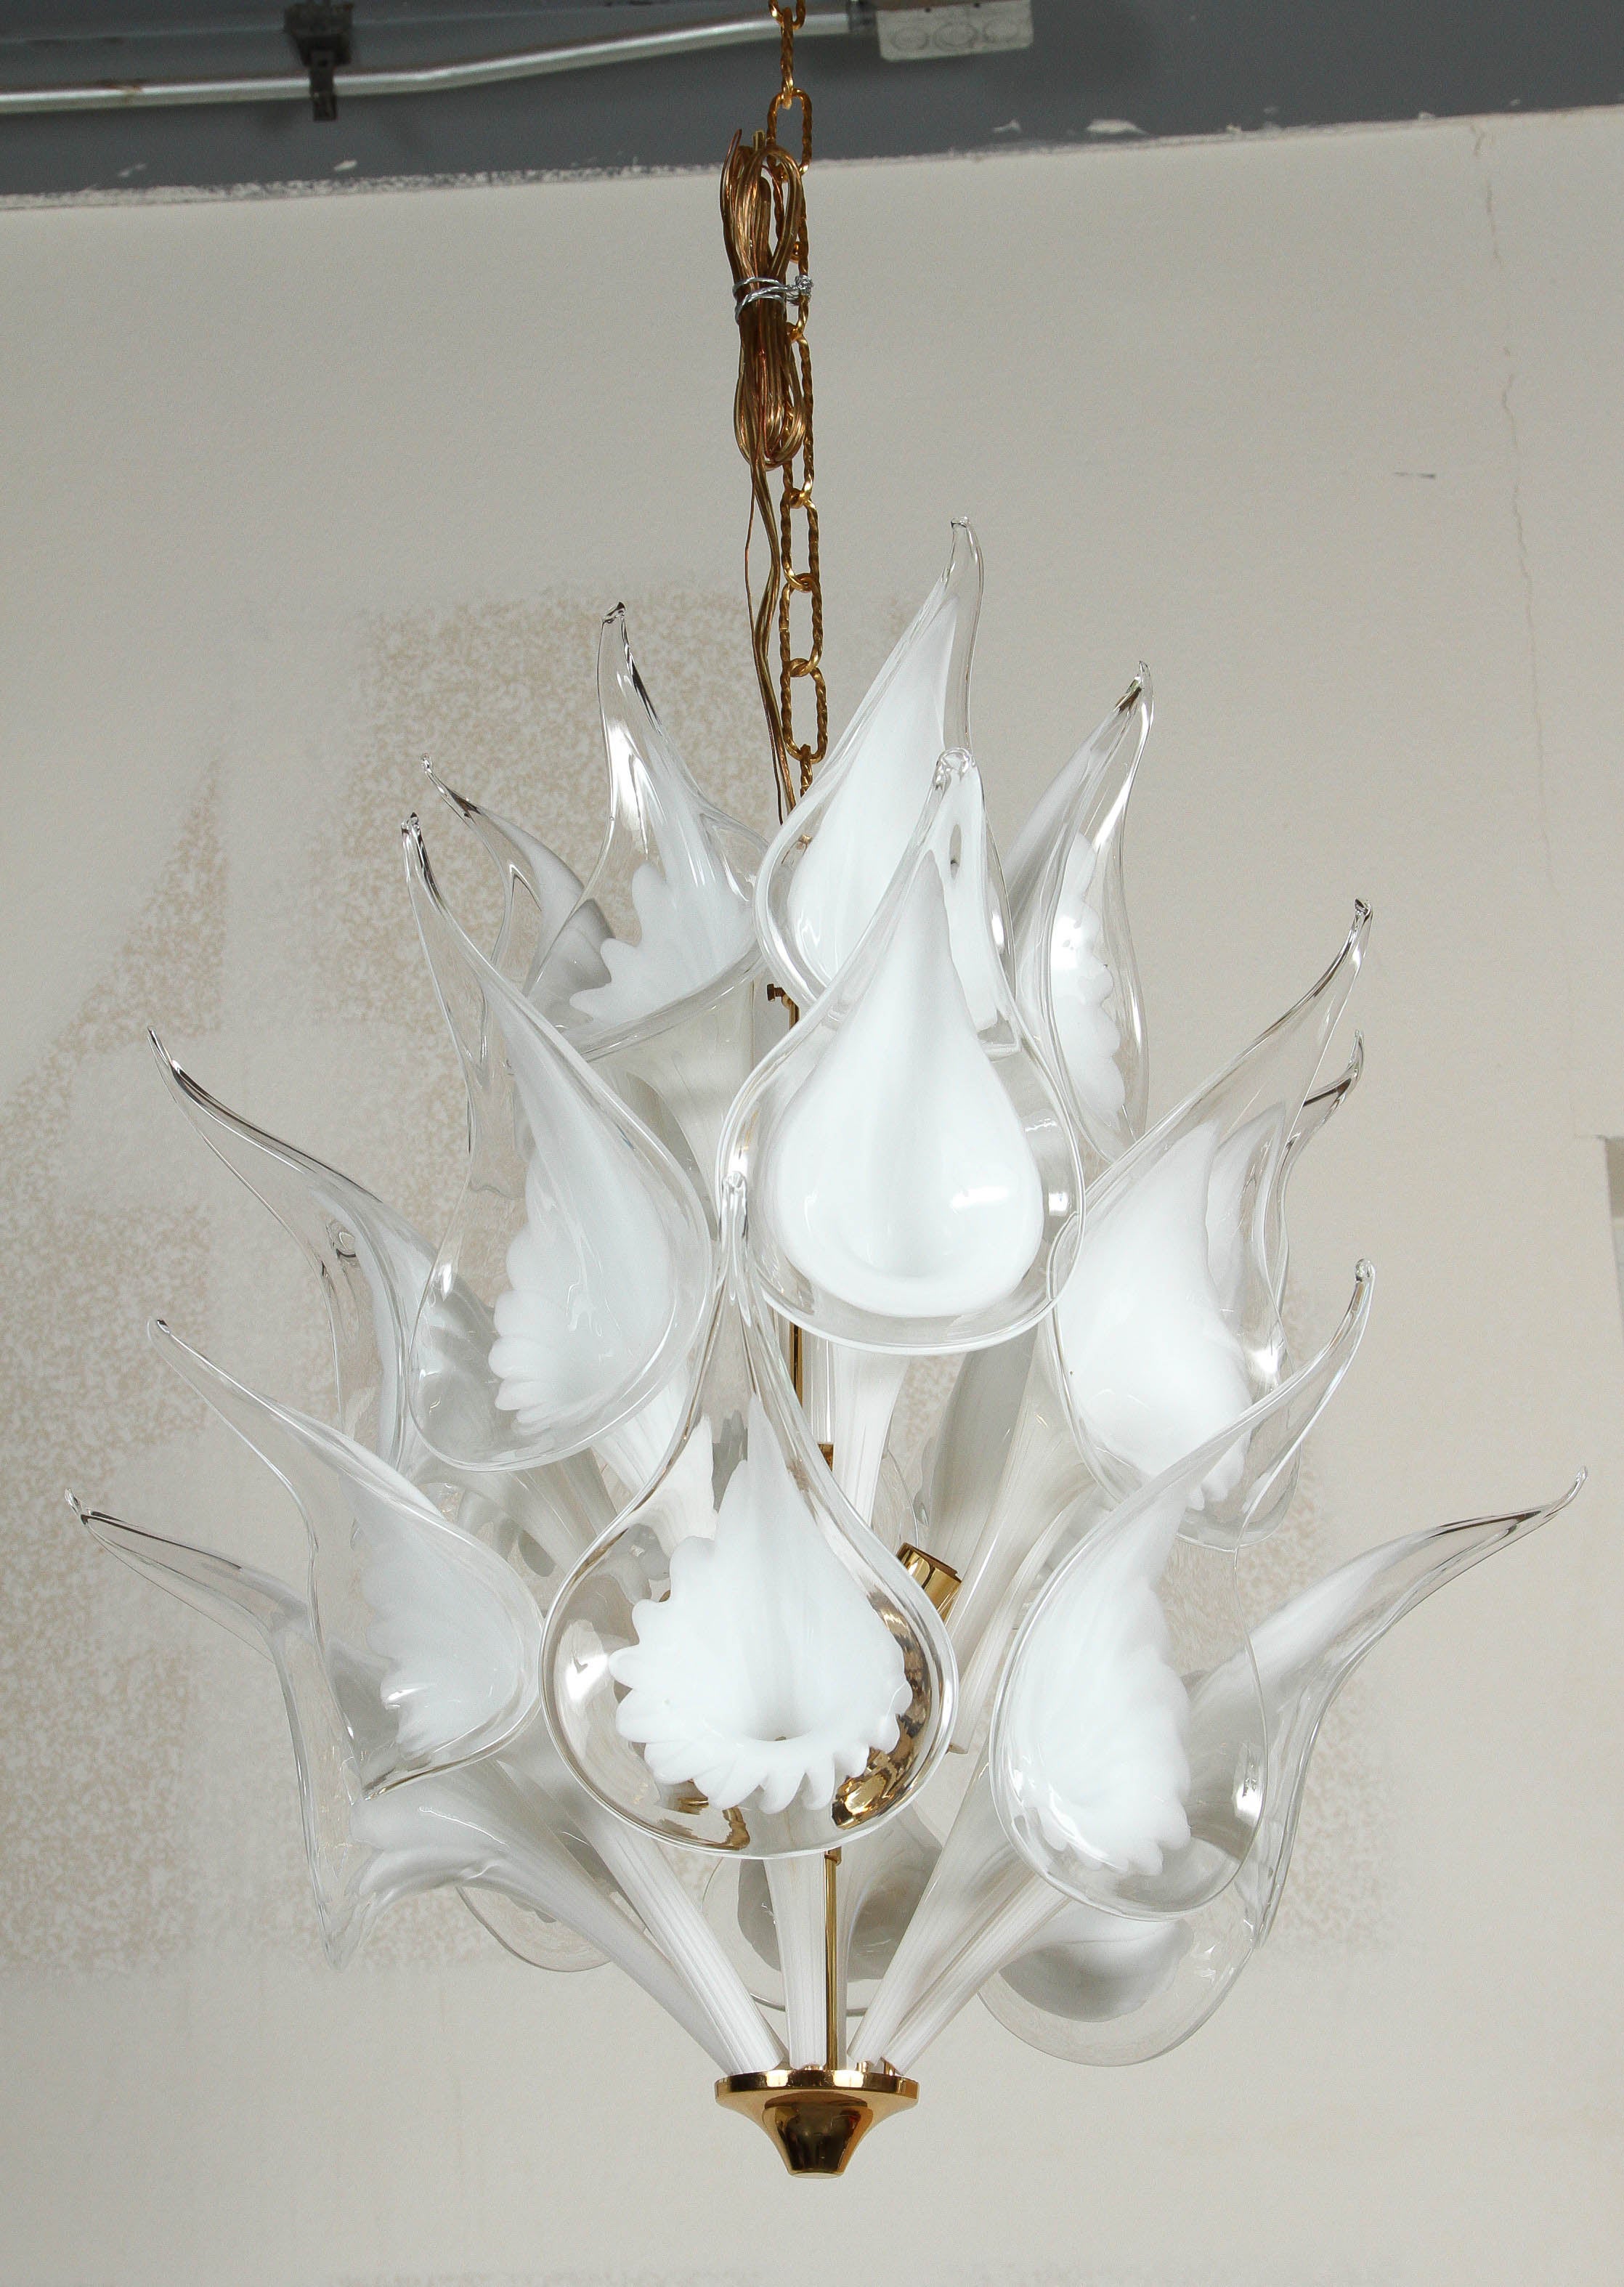 Calla Lily Chandelier by Camer